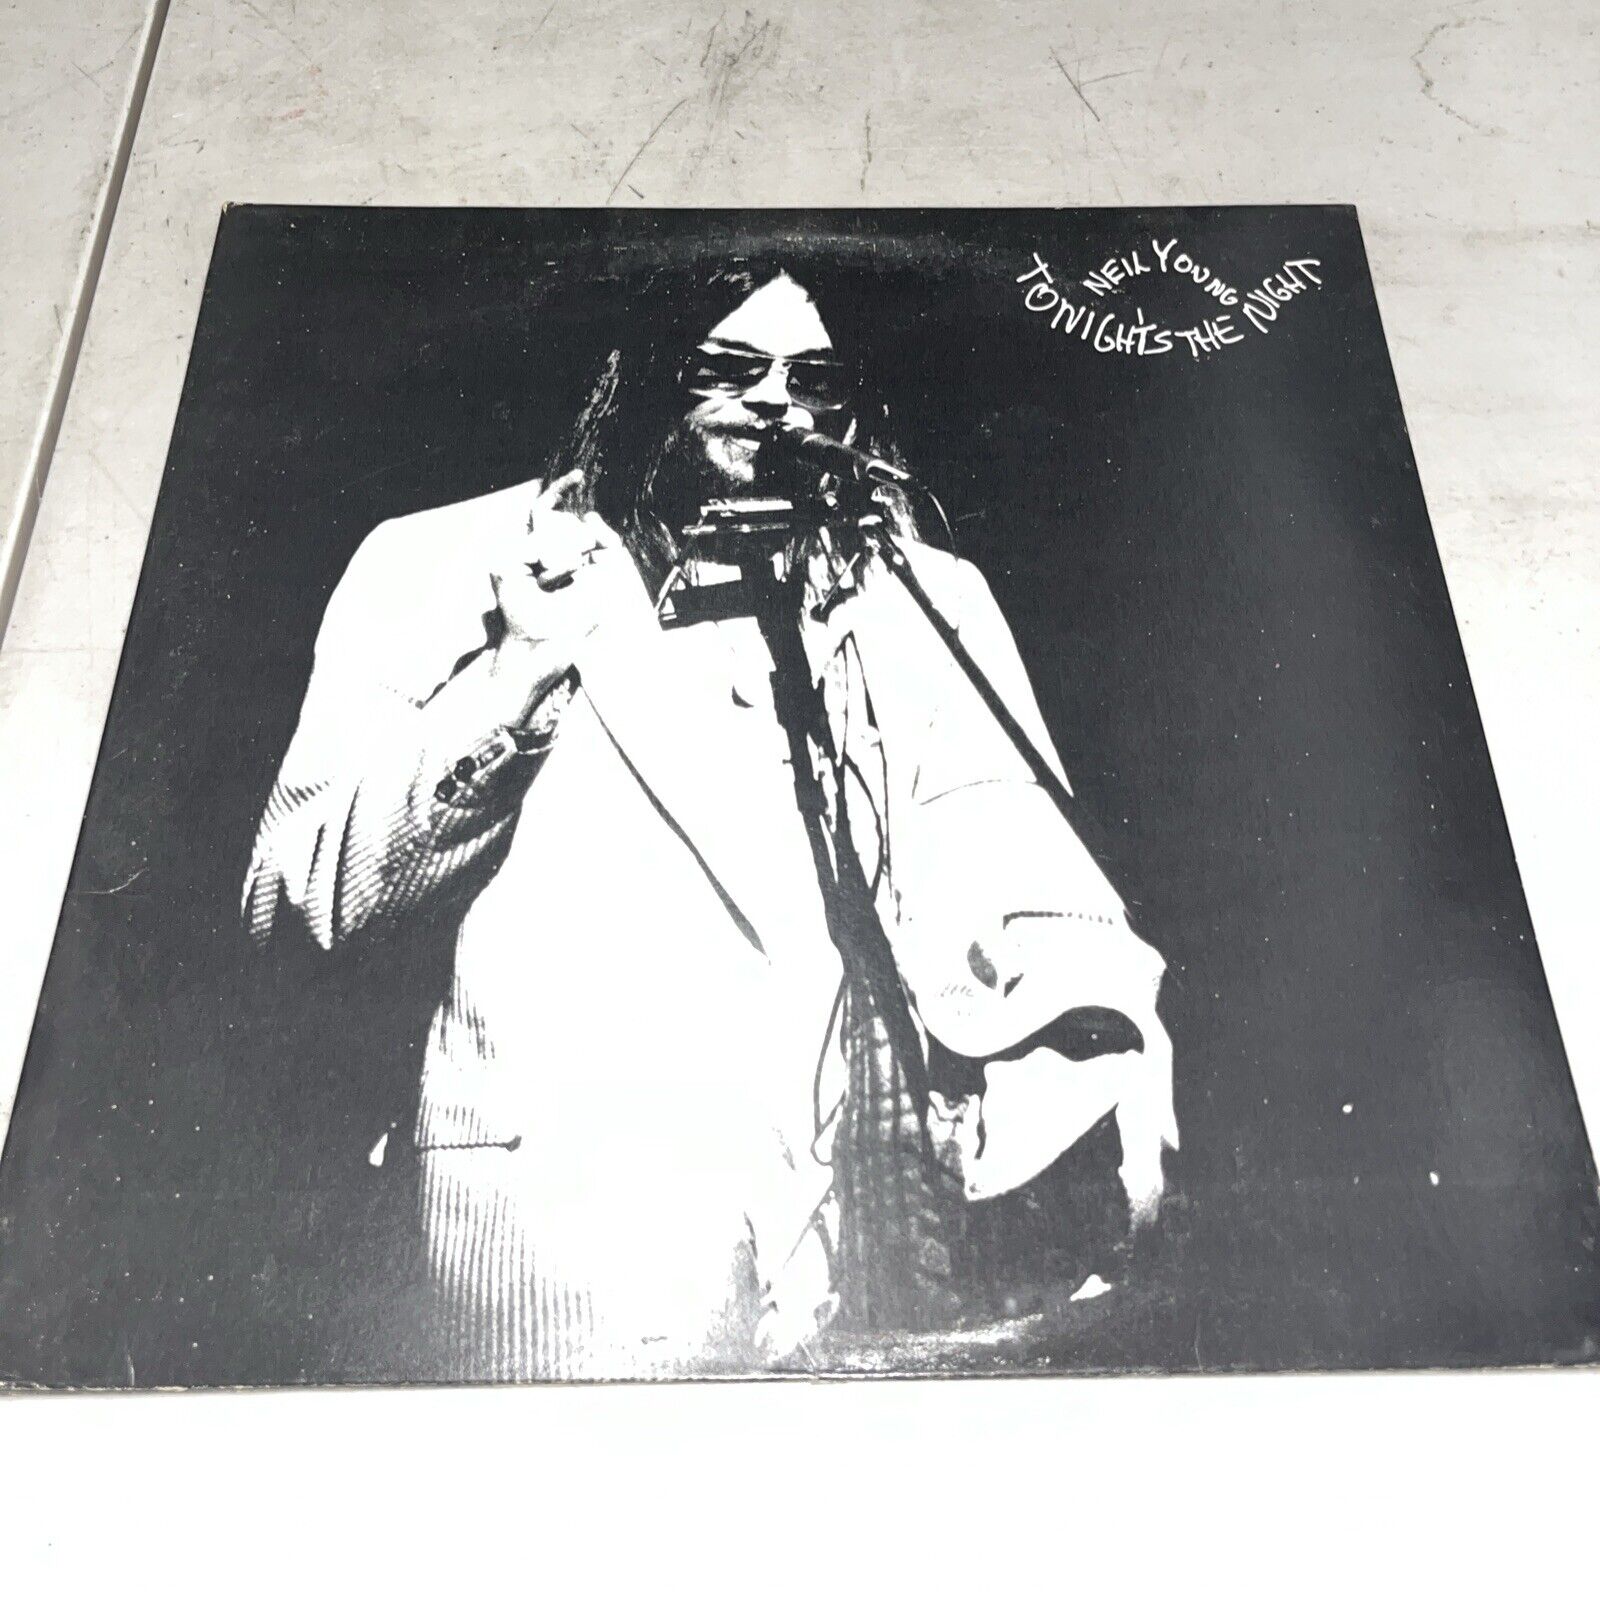 1975 VINTAGE REPRISE RECORDS NEIL YOUNG TONIGHT'S THE NIGHT VINYL LP MS 2221